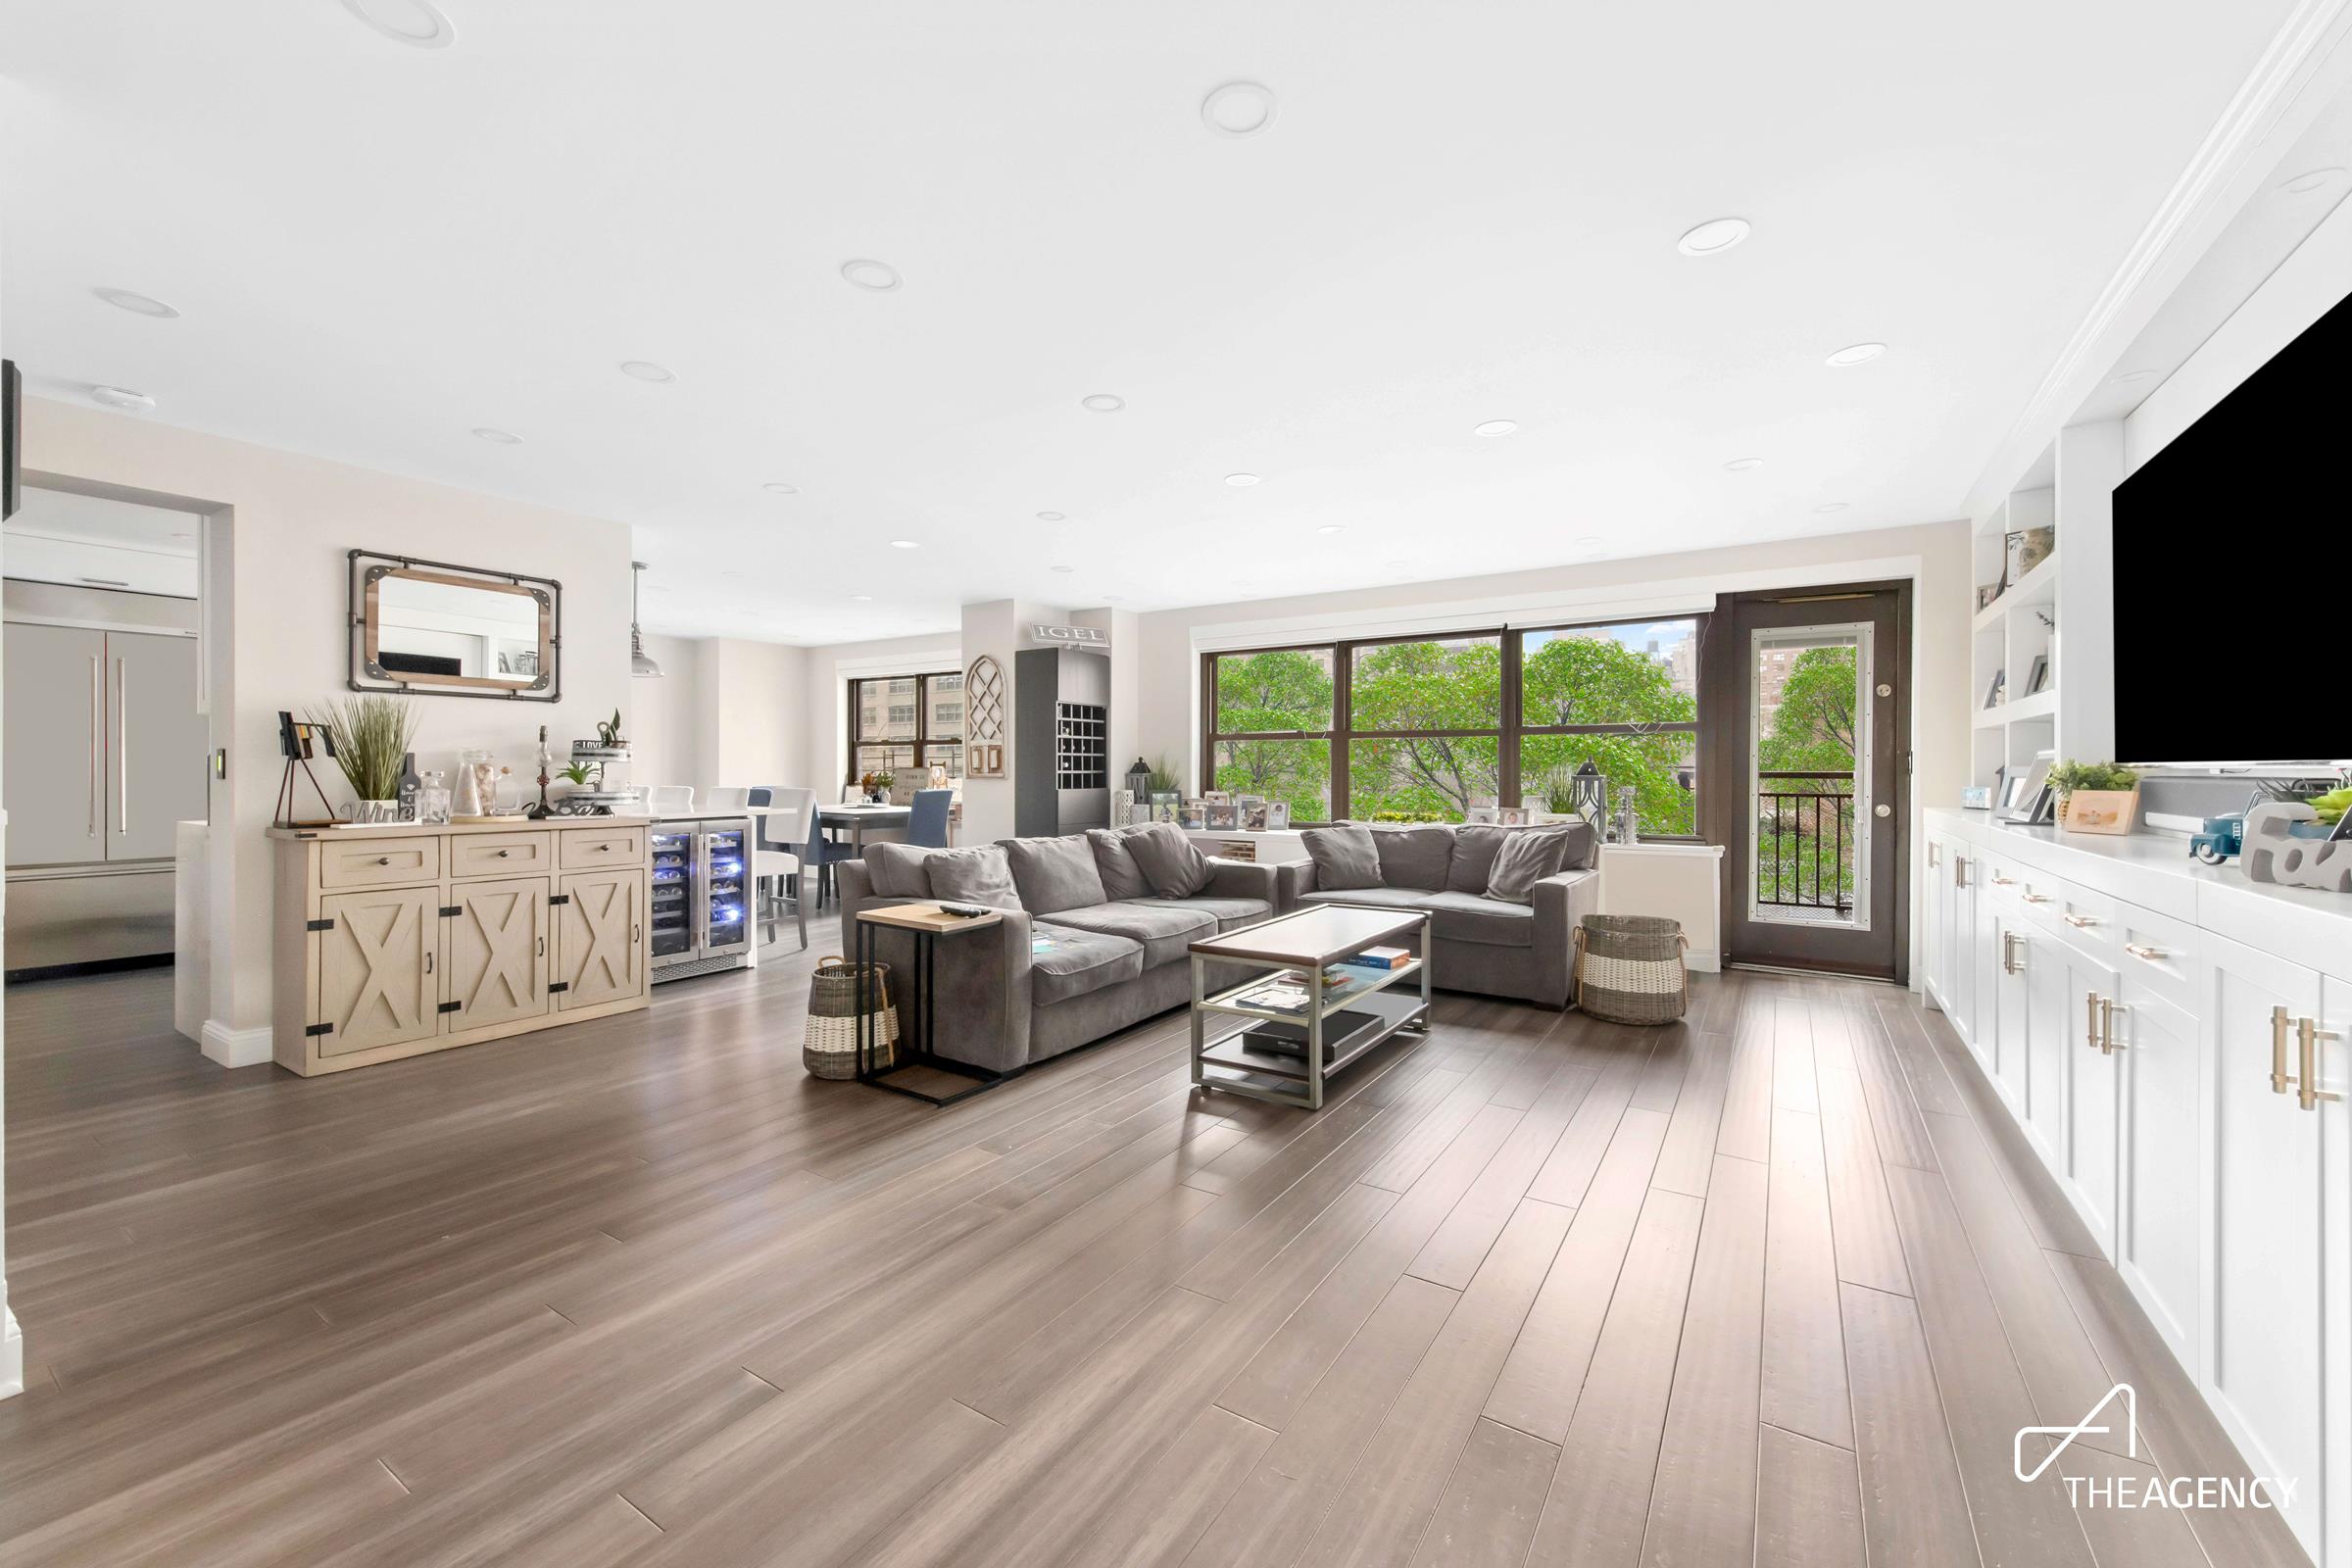 142 West End Avenue 4-Mn, Lincoln Square, Upper West Side, NYC - 4 Bedrooms  
3 Bathrooms  
7 Rooms - 